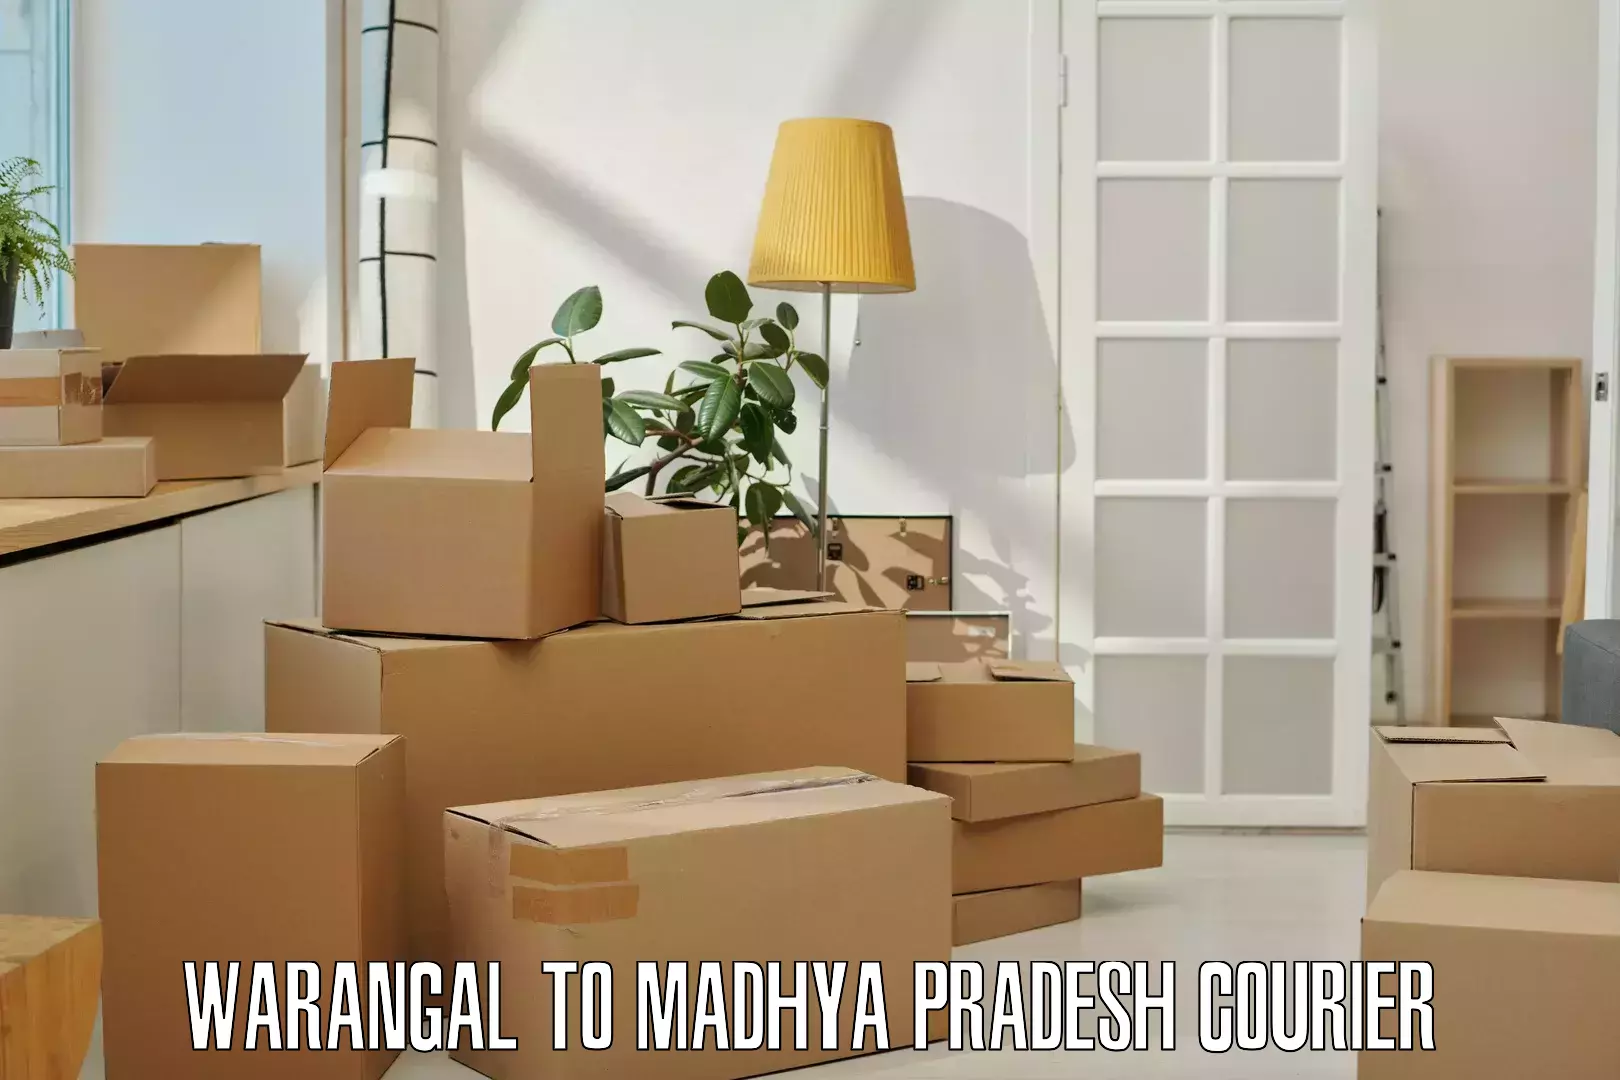 State-of-the-art courier technology Warangal to Nainpur